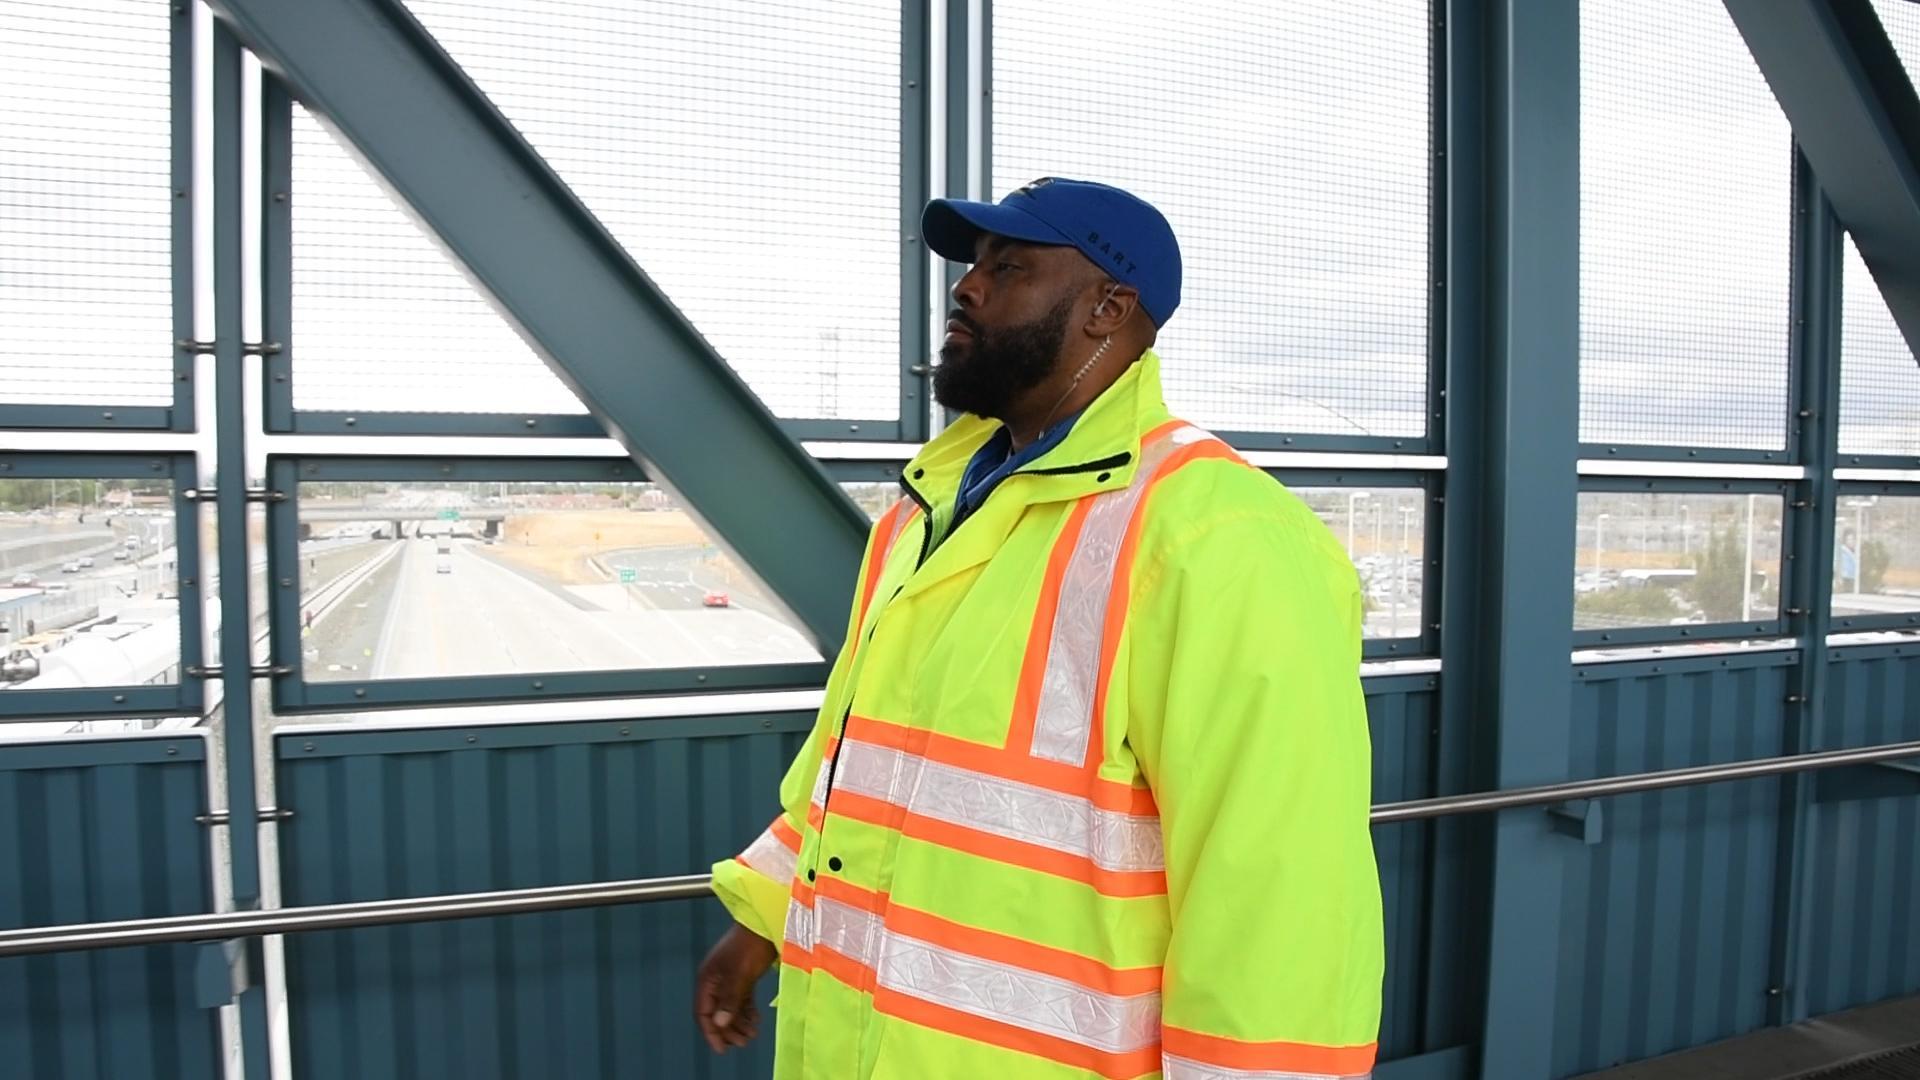 Donald Cornelius, a member of AFSCME Local 3993, walks through the new BART station in Antioch